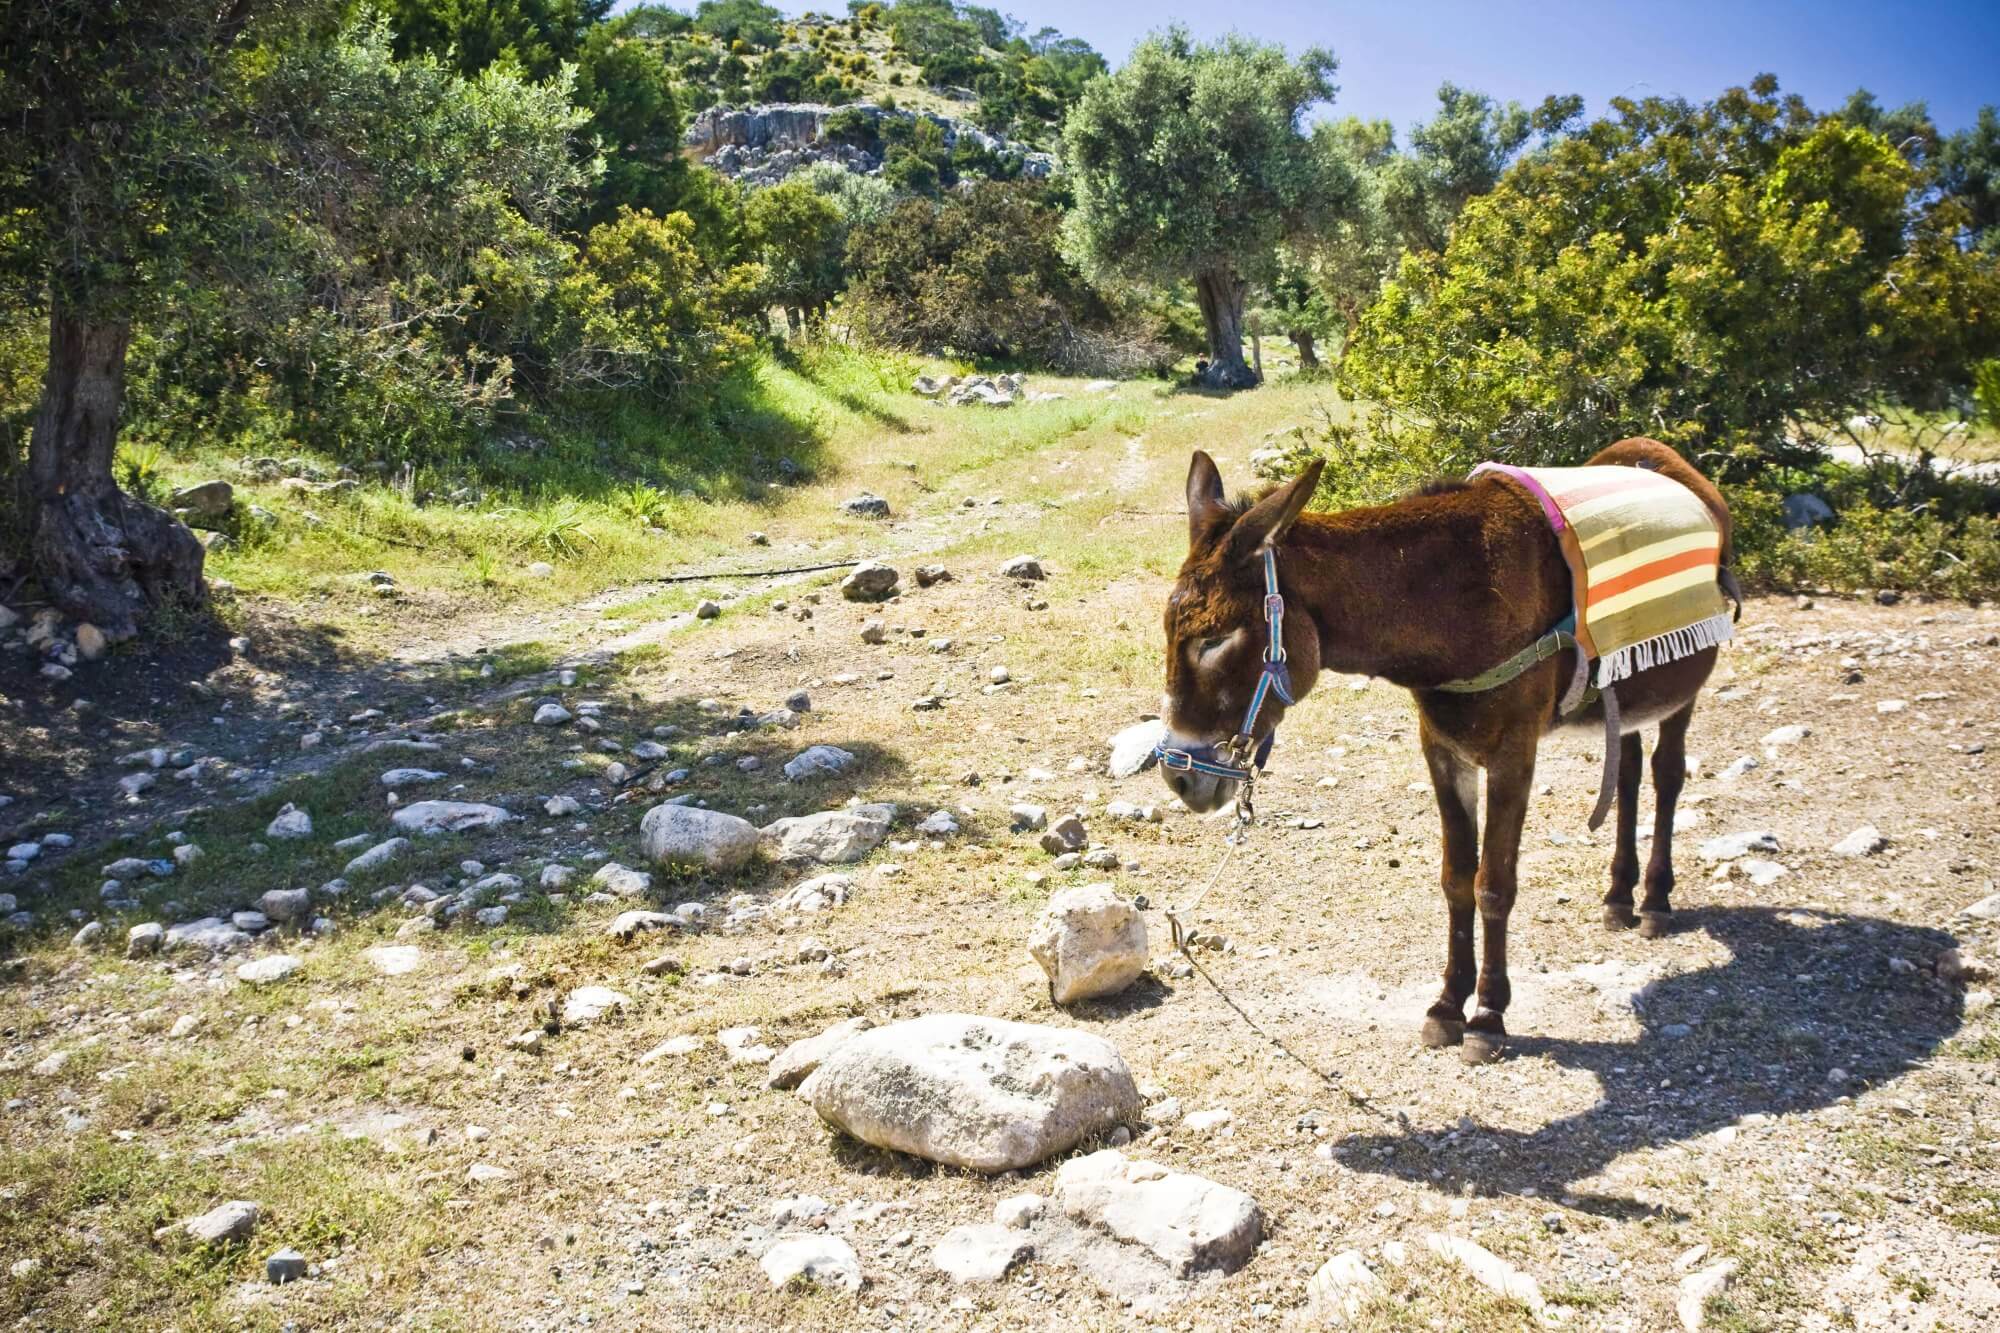 A Cyprus donkey out in the wild in Karpaz